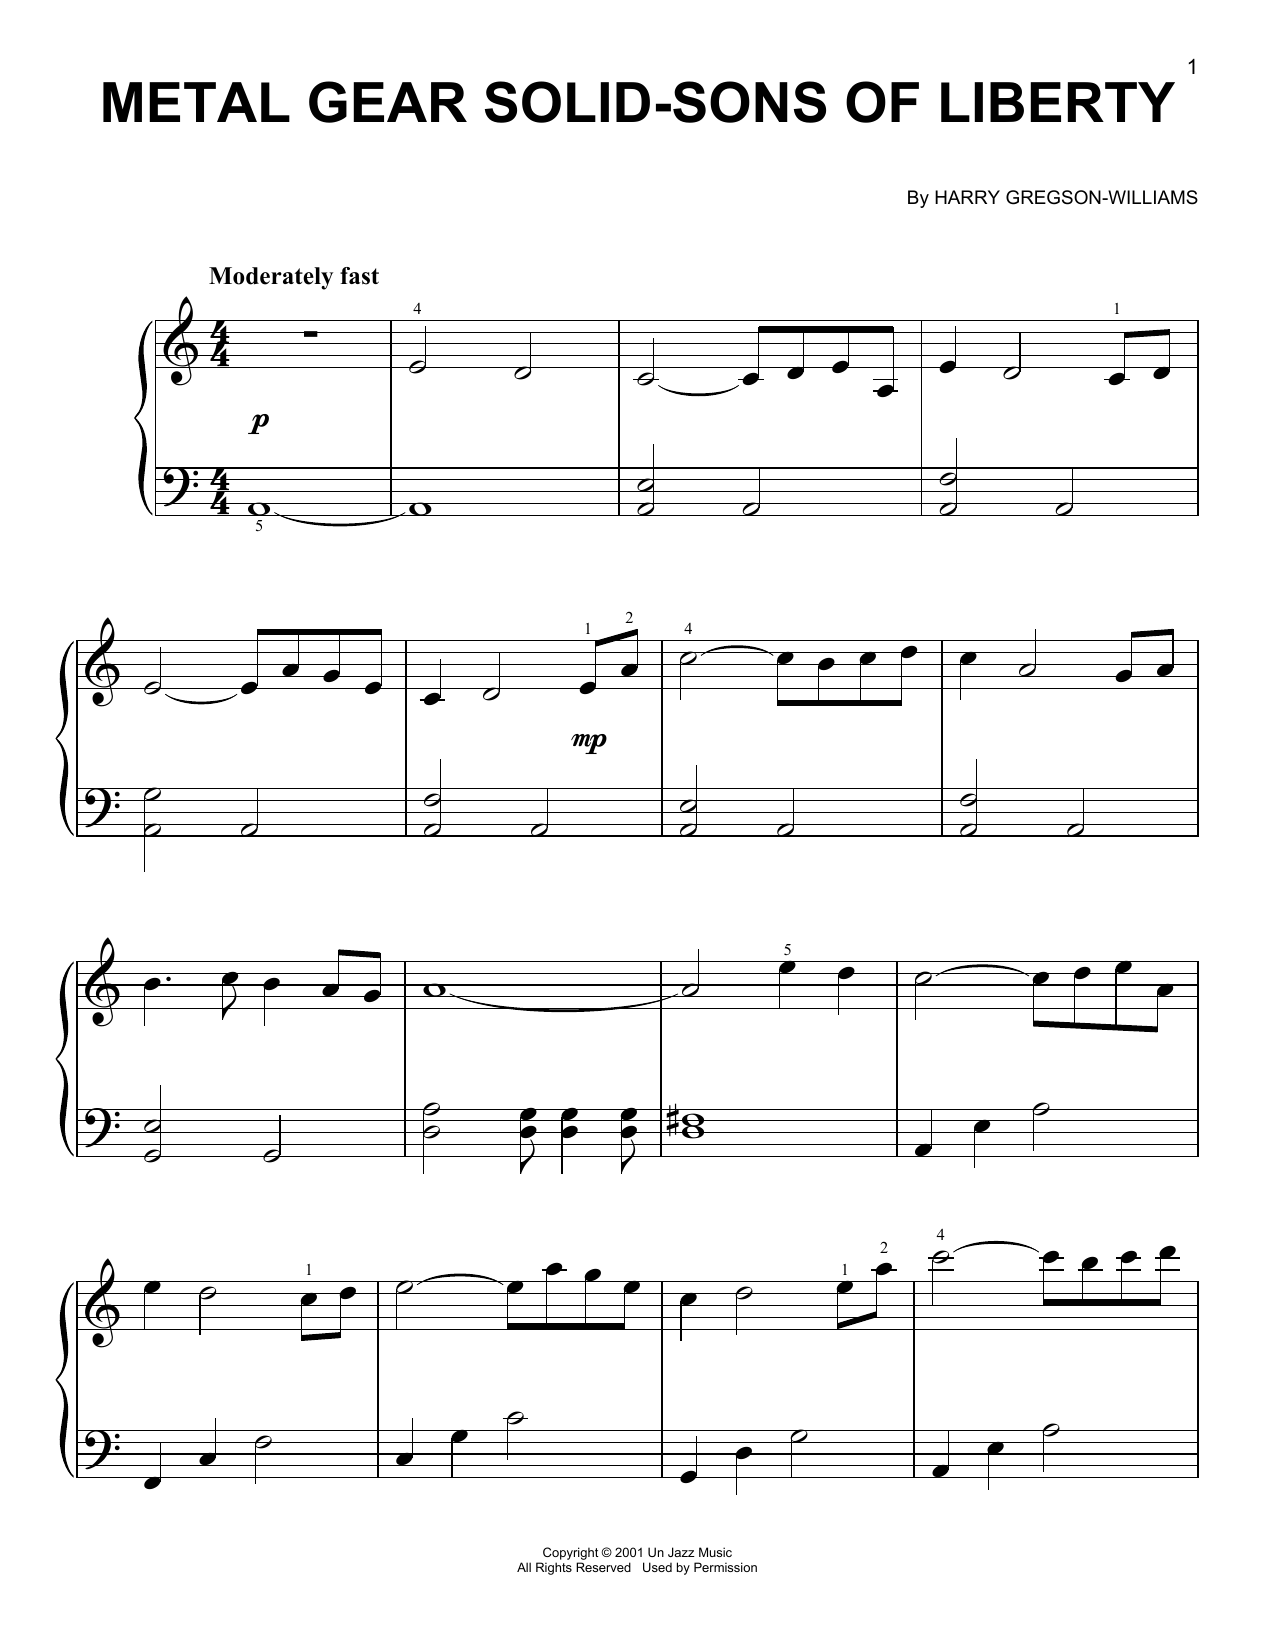 Download Harry Gregson-Williams Metal Gear Solid - Sons Of Liberty Sheet Music